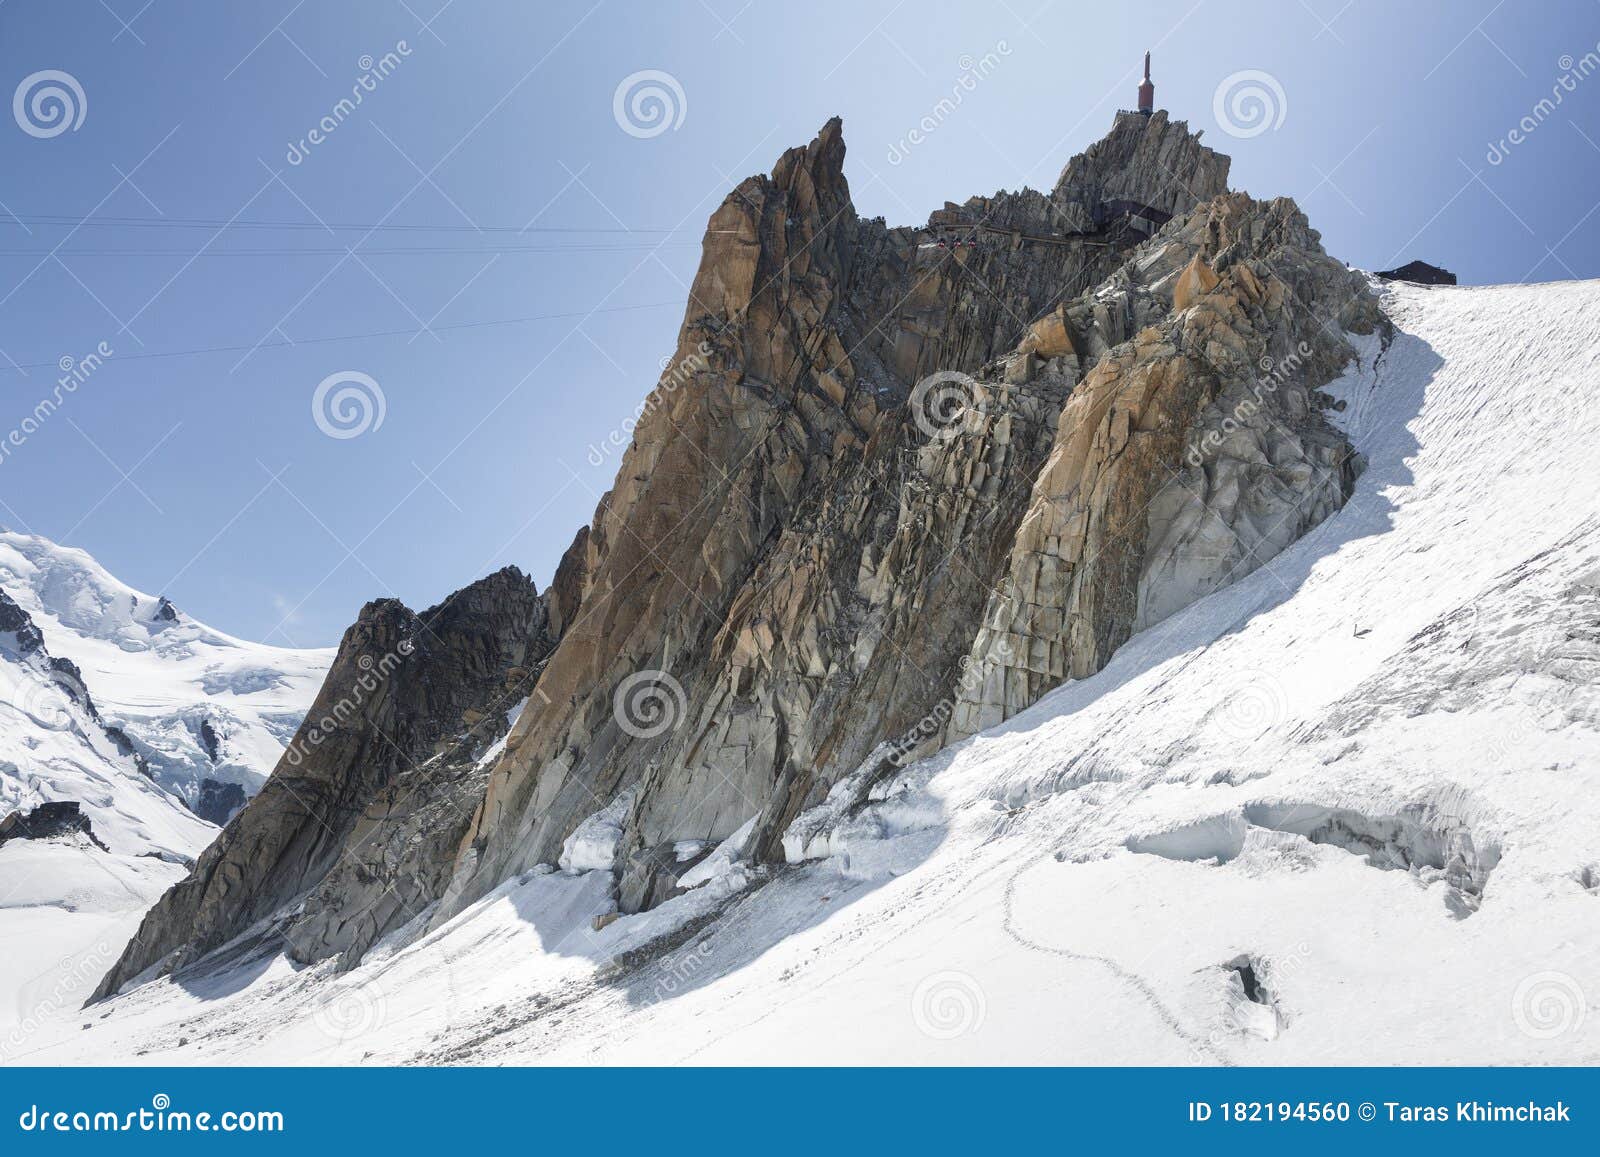 beautiful view of the aiguille du midi from cosmique refuge in the french alps, chamonix mont-blanc, france